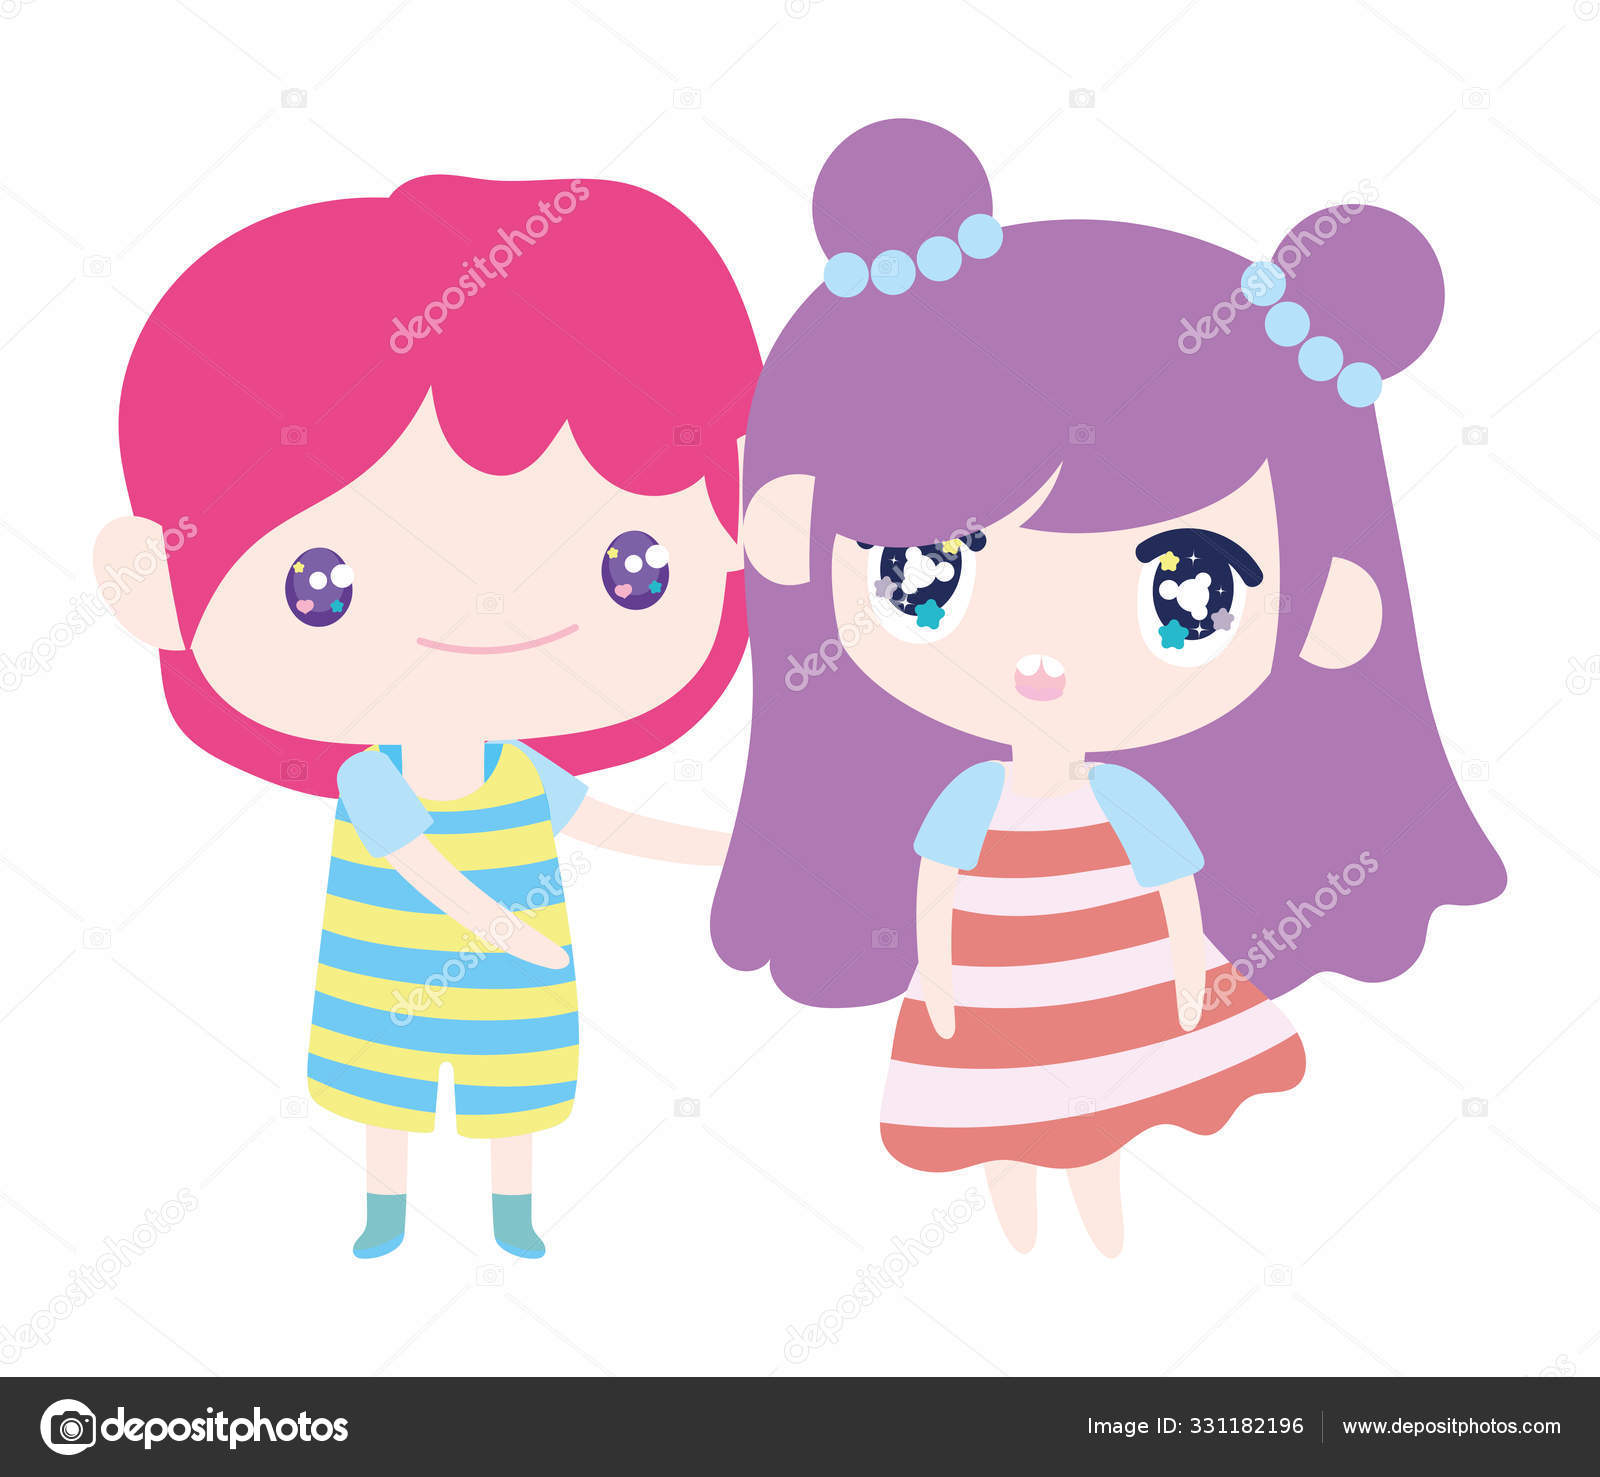 Kids Little Girl And Boy Anime Cartoon Characters Vector Image By C Stockgiu Vector Stock